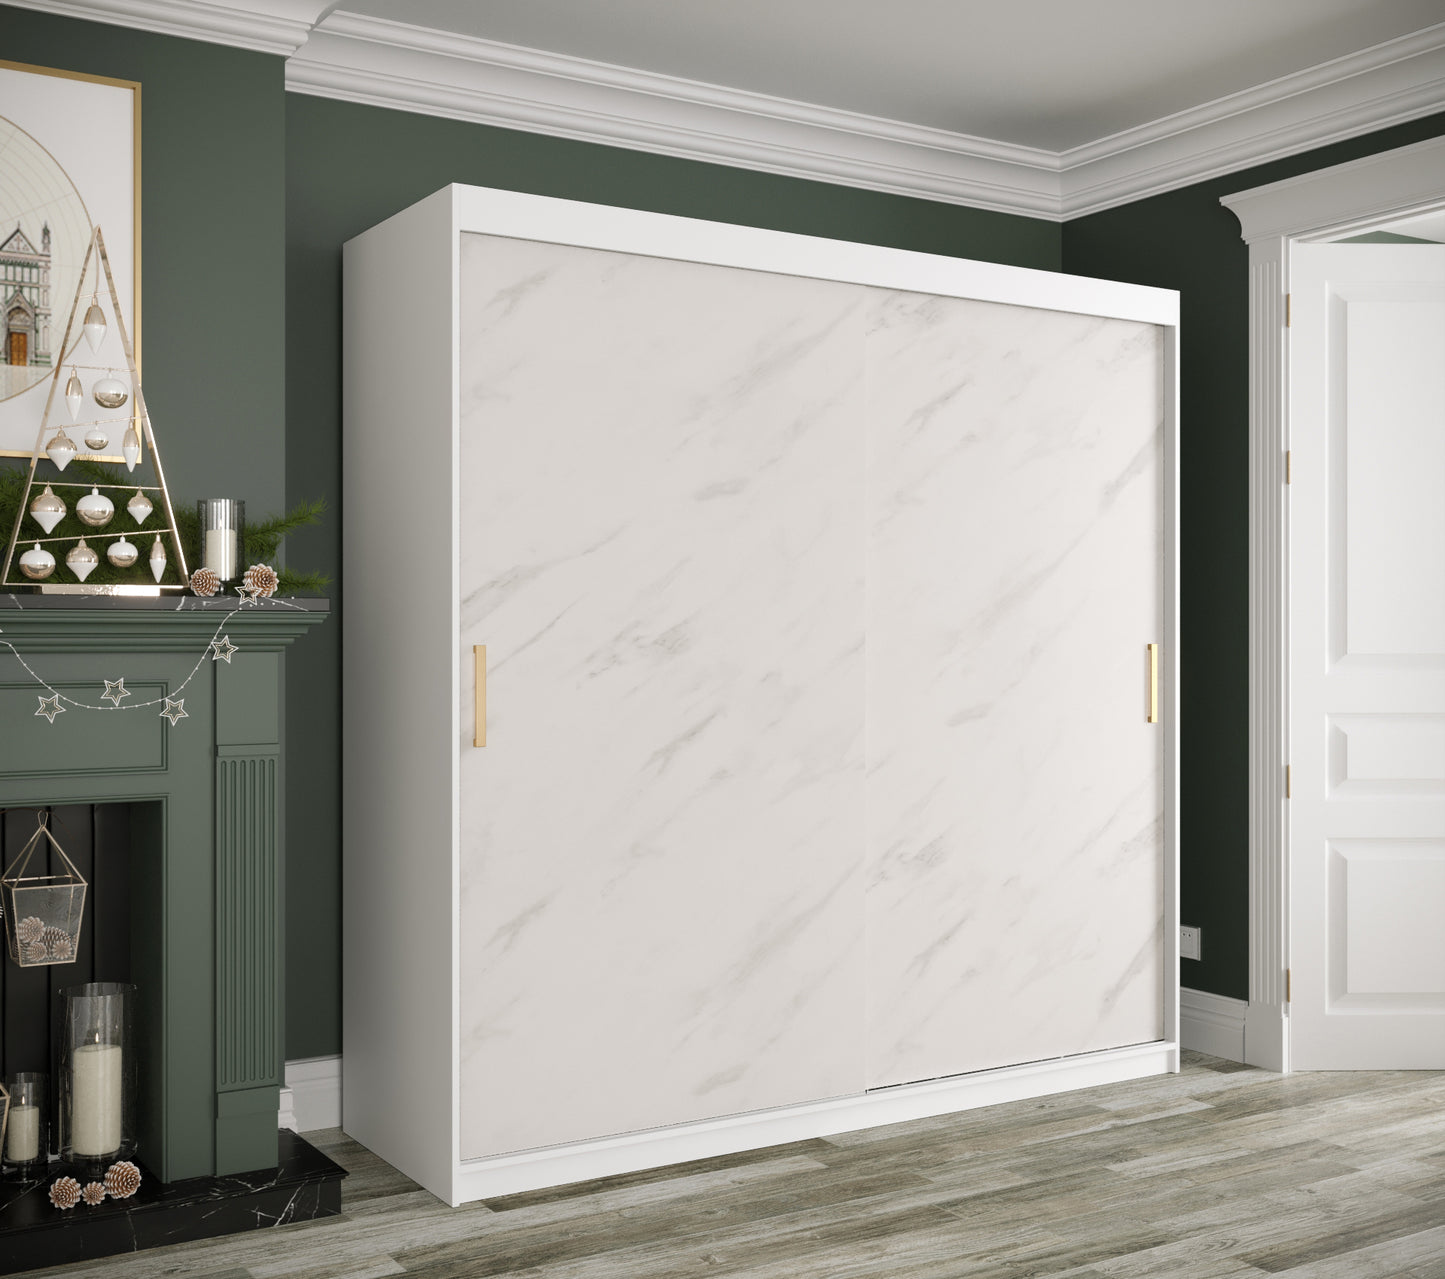 MARBLE T - Wardrobe with Sliding Doors, Shelves, 2 x Hanging Rails and Optional Drawers >200cm<